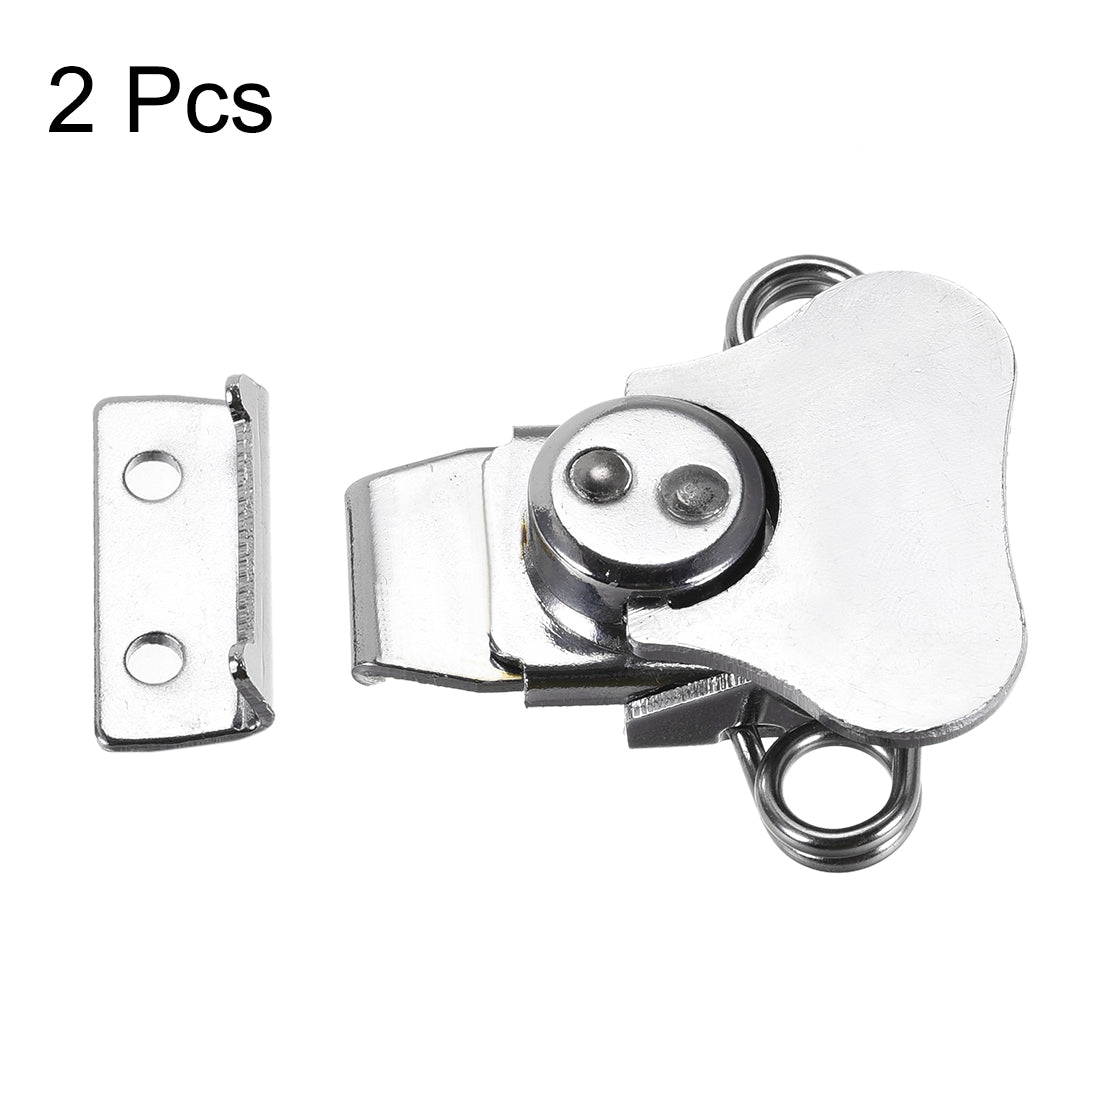 uxcell Uxcell 1.65-inch Iron Spring Loaded Butterfly Twist Latch Keeper Toggle Clamp - 2 Pcs (Silver)